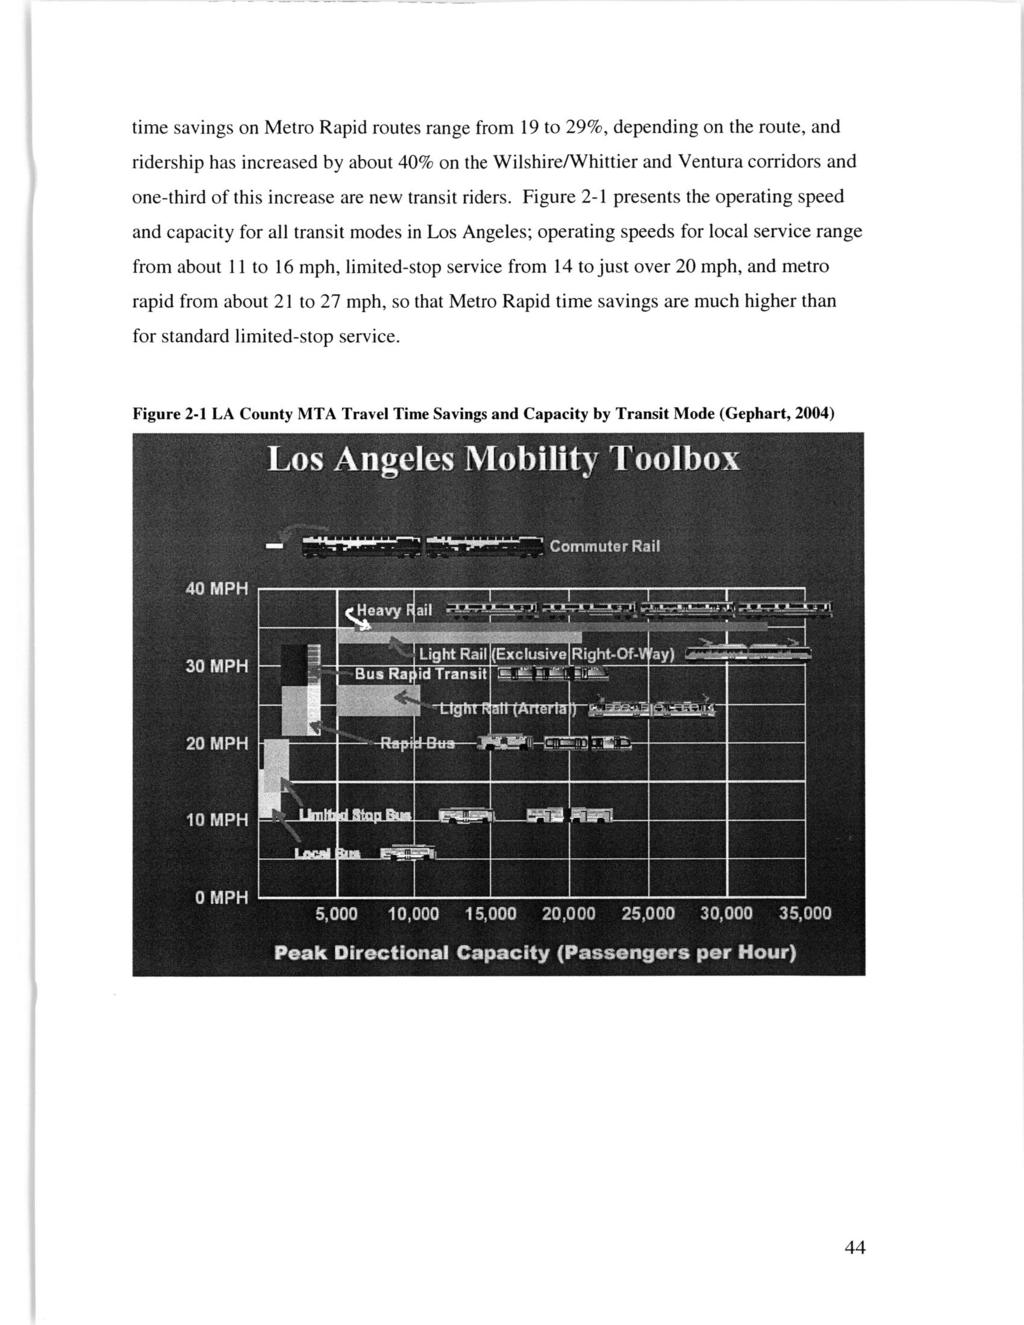 time savings on Metro Rapid routes range from 19 to 29%, depending on the route, and ridership has increased by about 40% on the Wilshire/Whittier and Ventura corridors and one-third of this increase